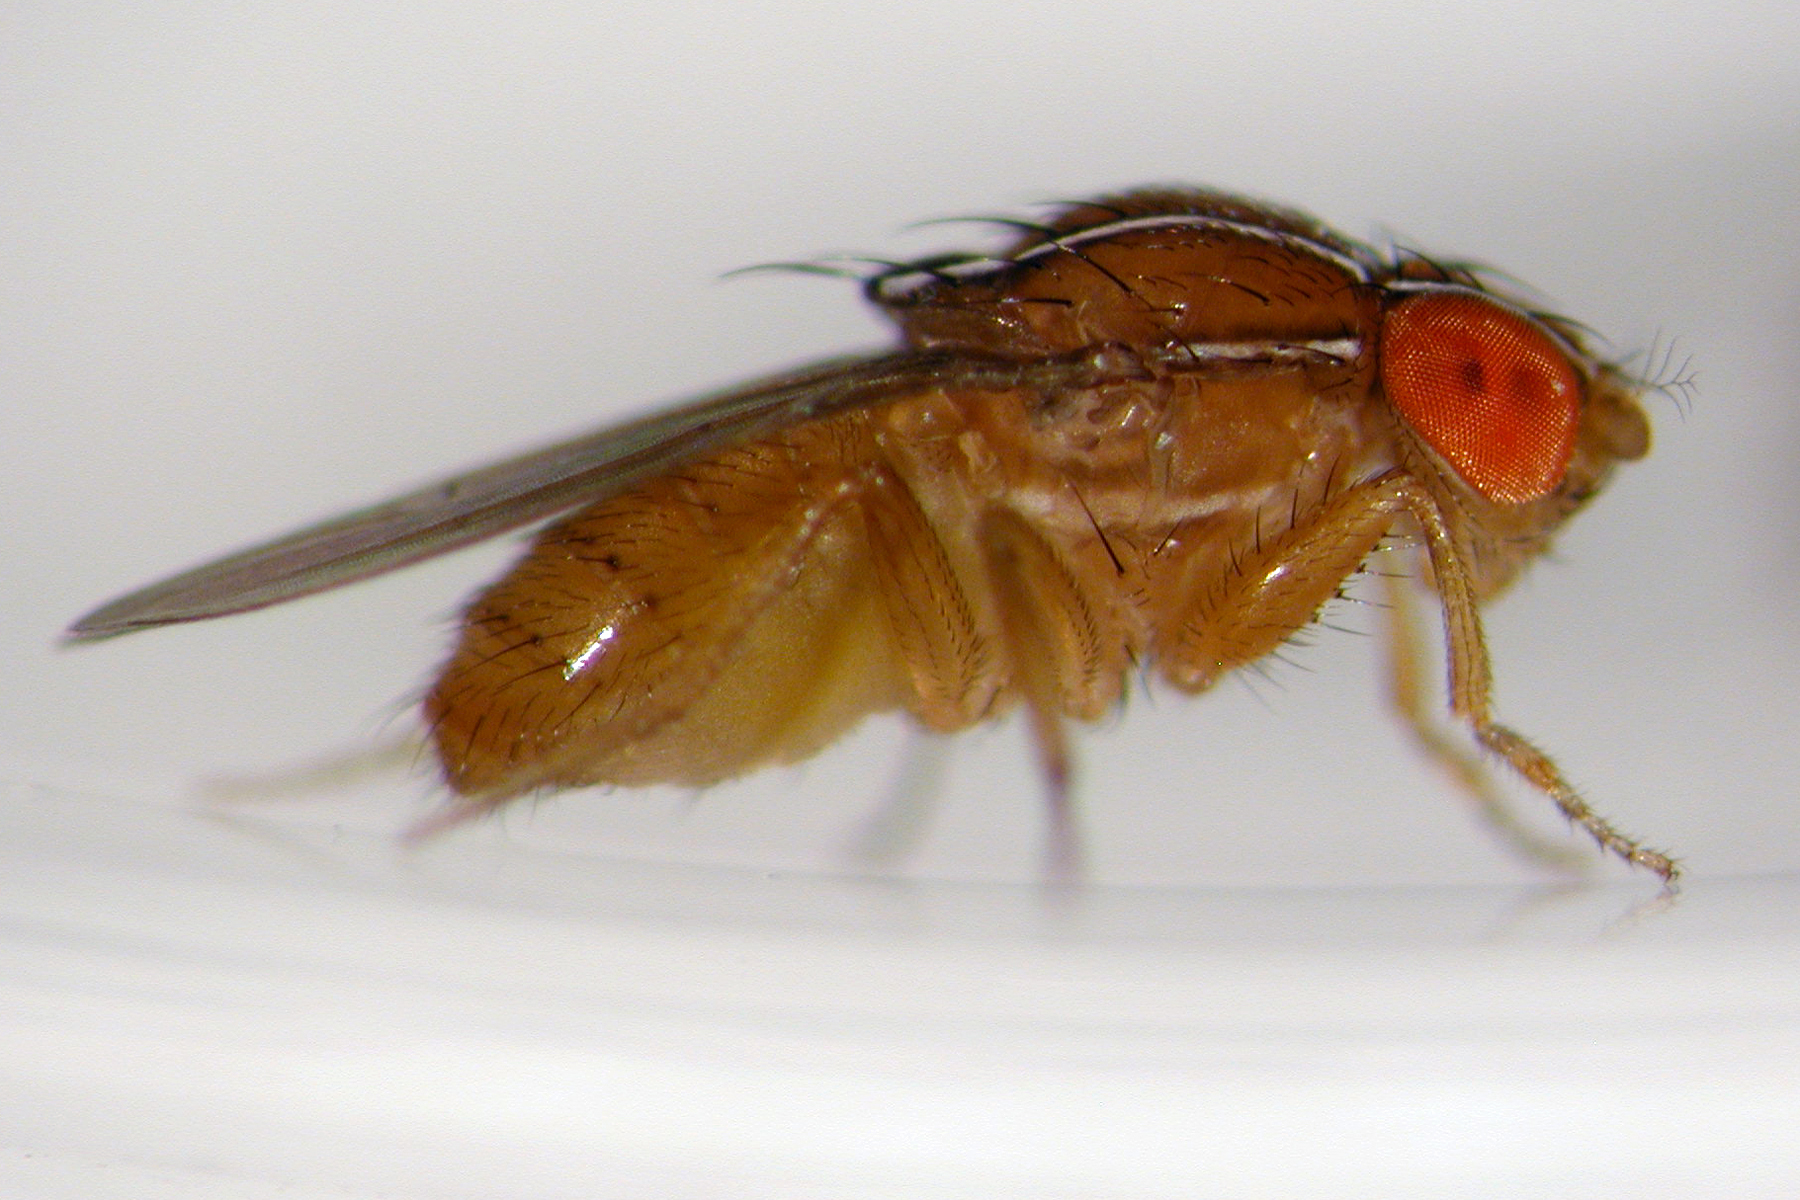 Caption: This male fruit fly